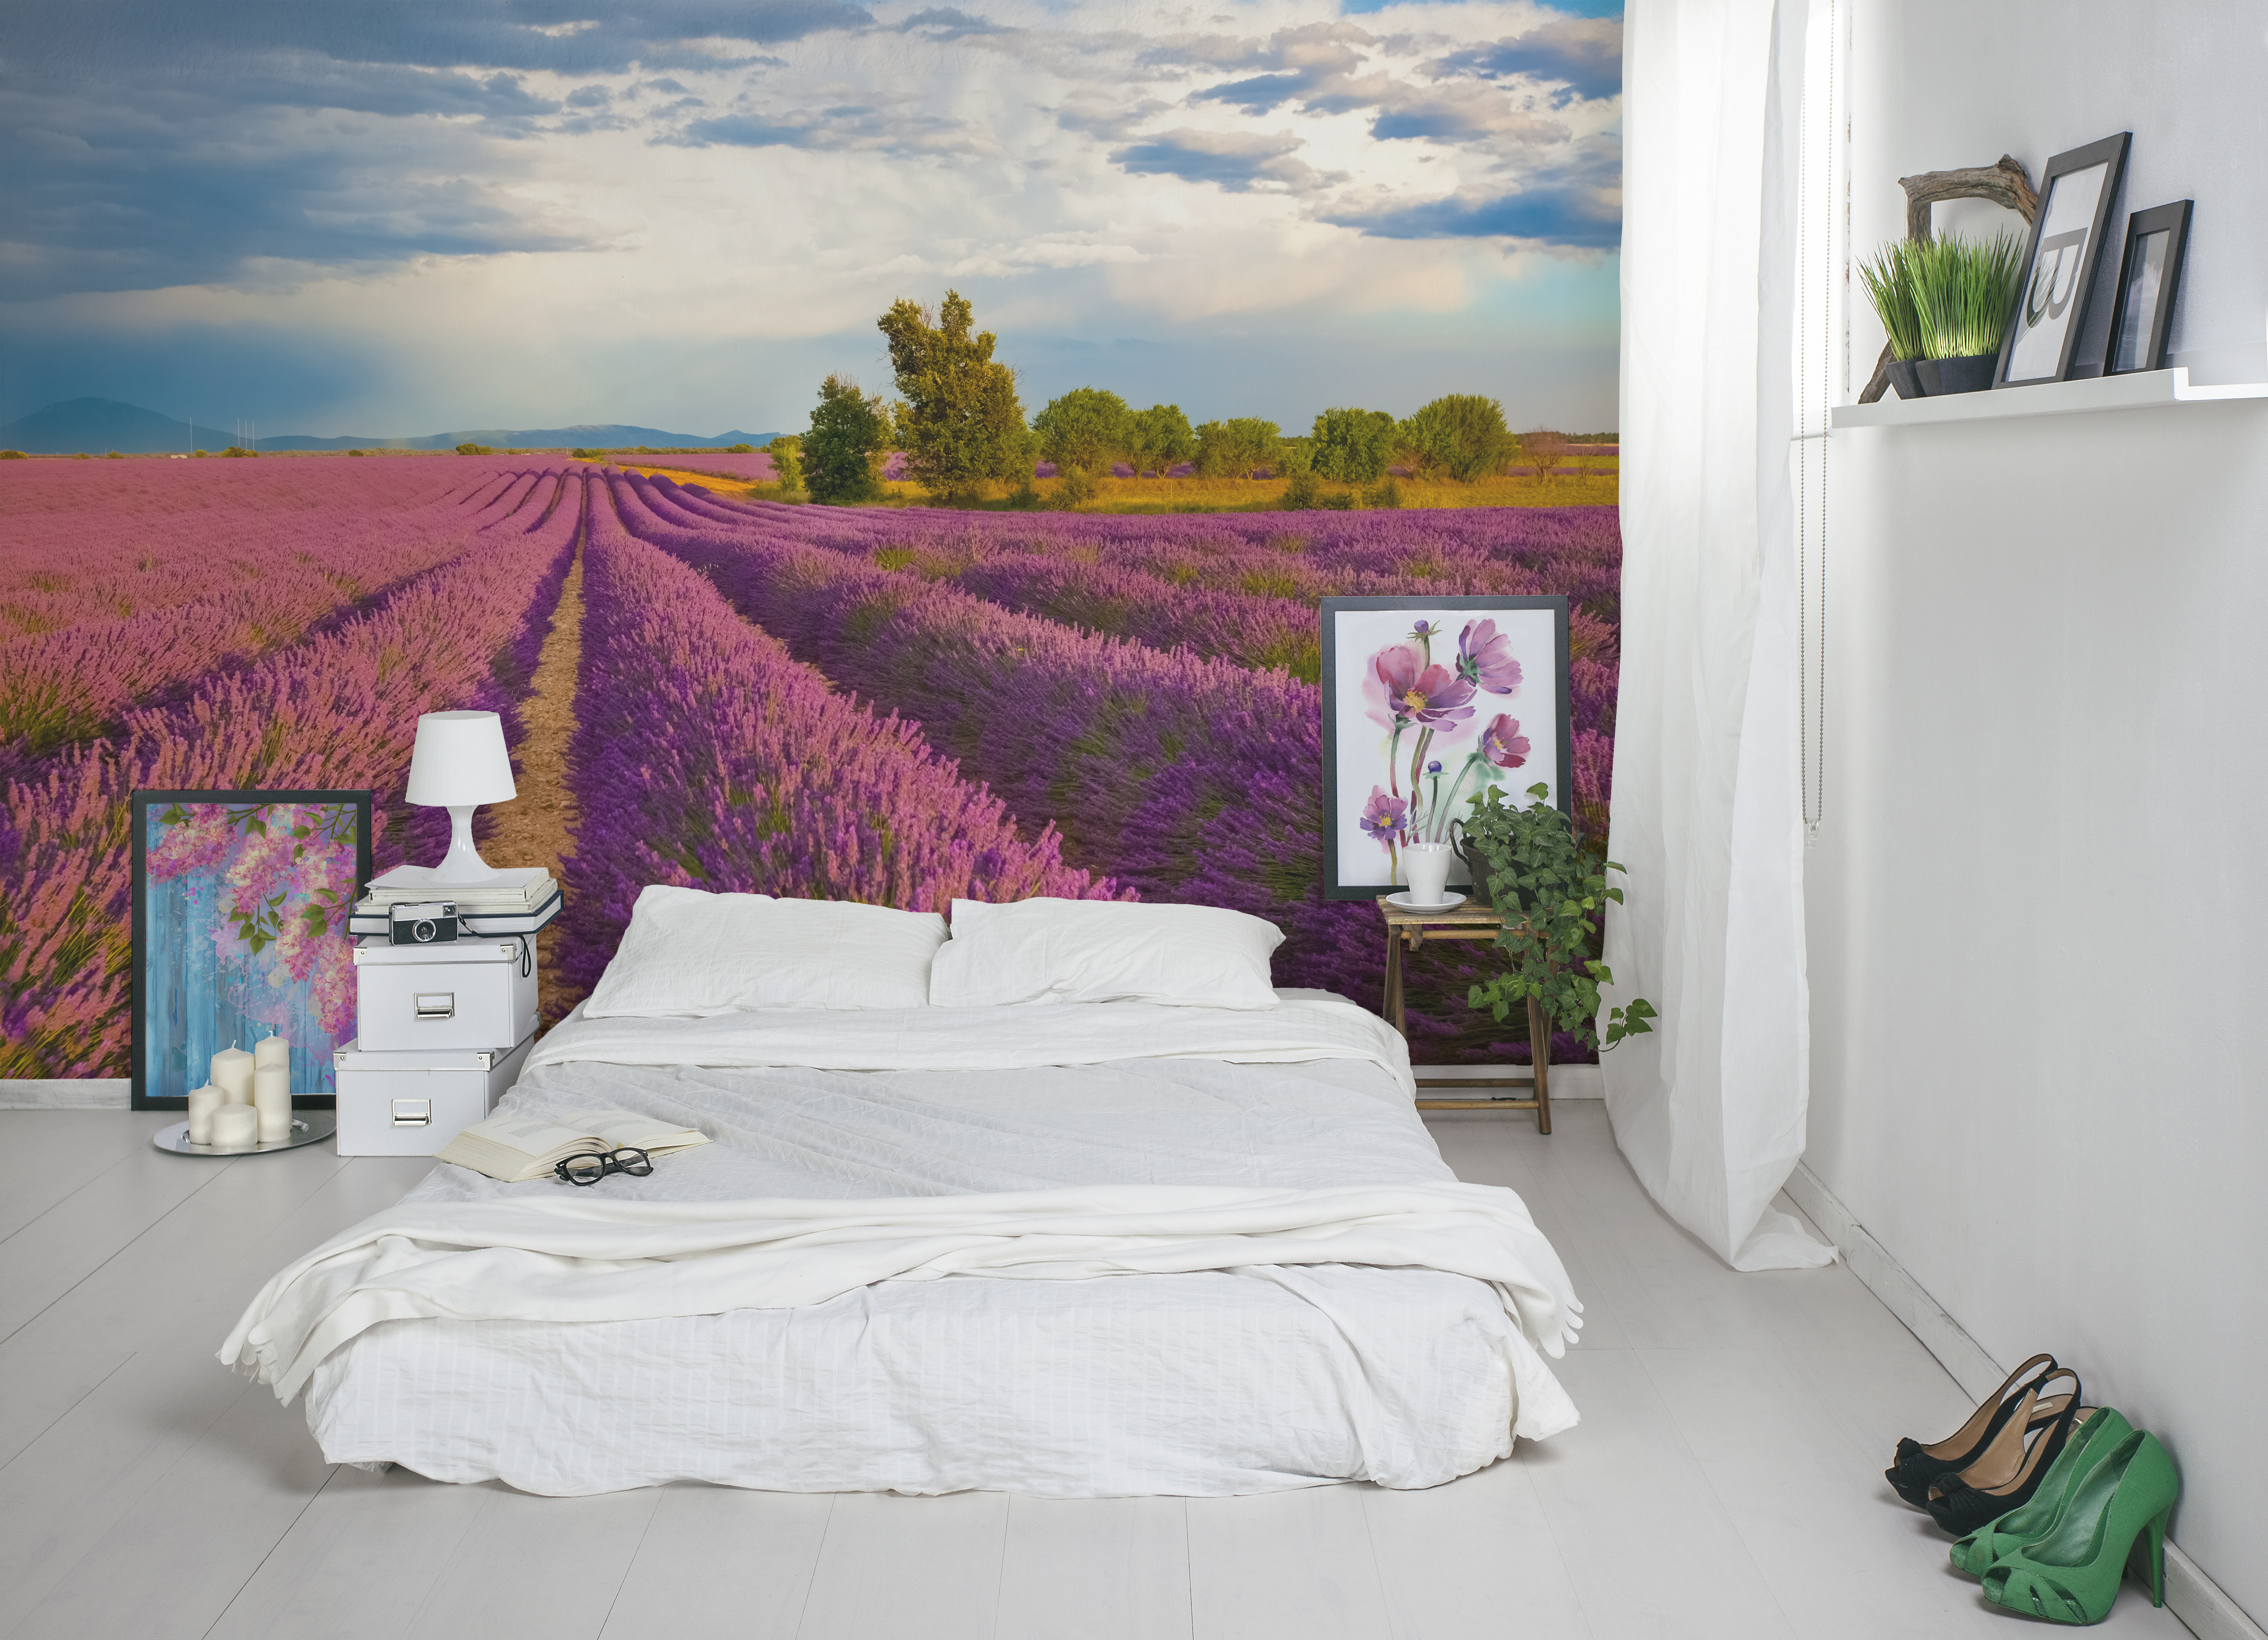 Heathland • Provencal - Bedroom - Flowers and plants - Landscapes - Wall Murals - Posters